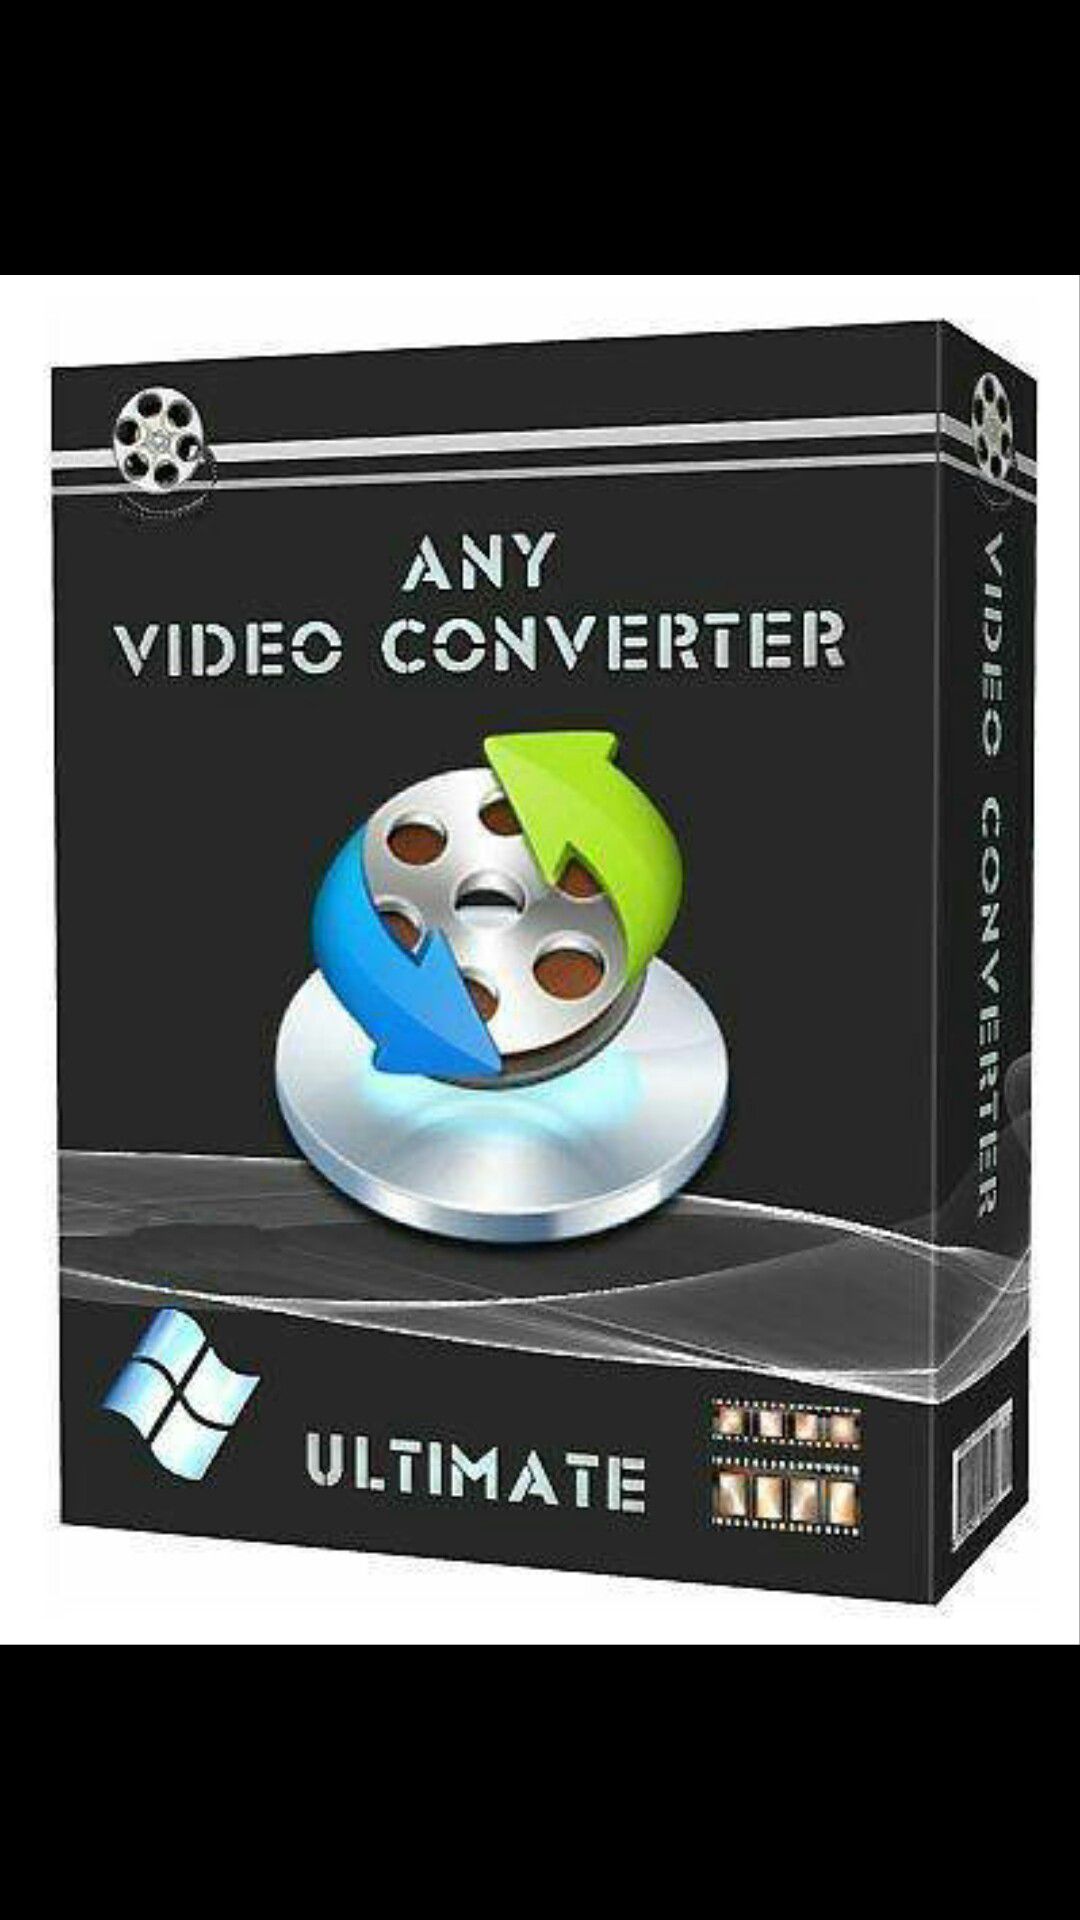 Any Video Converter Ultimate 6